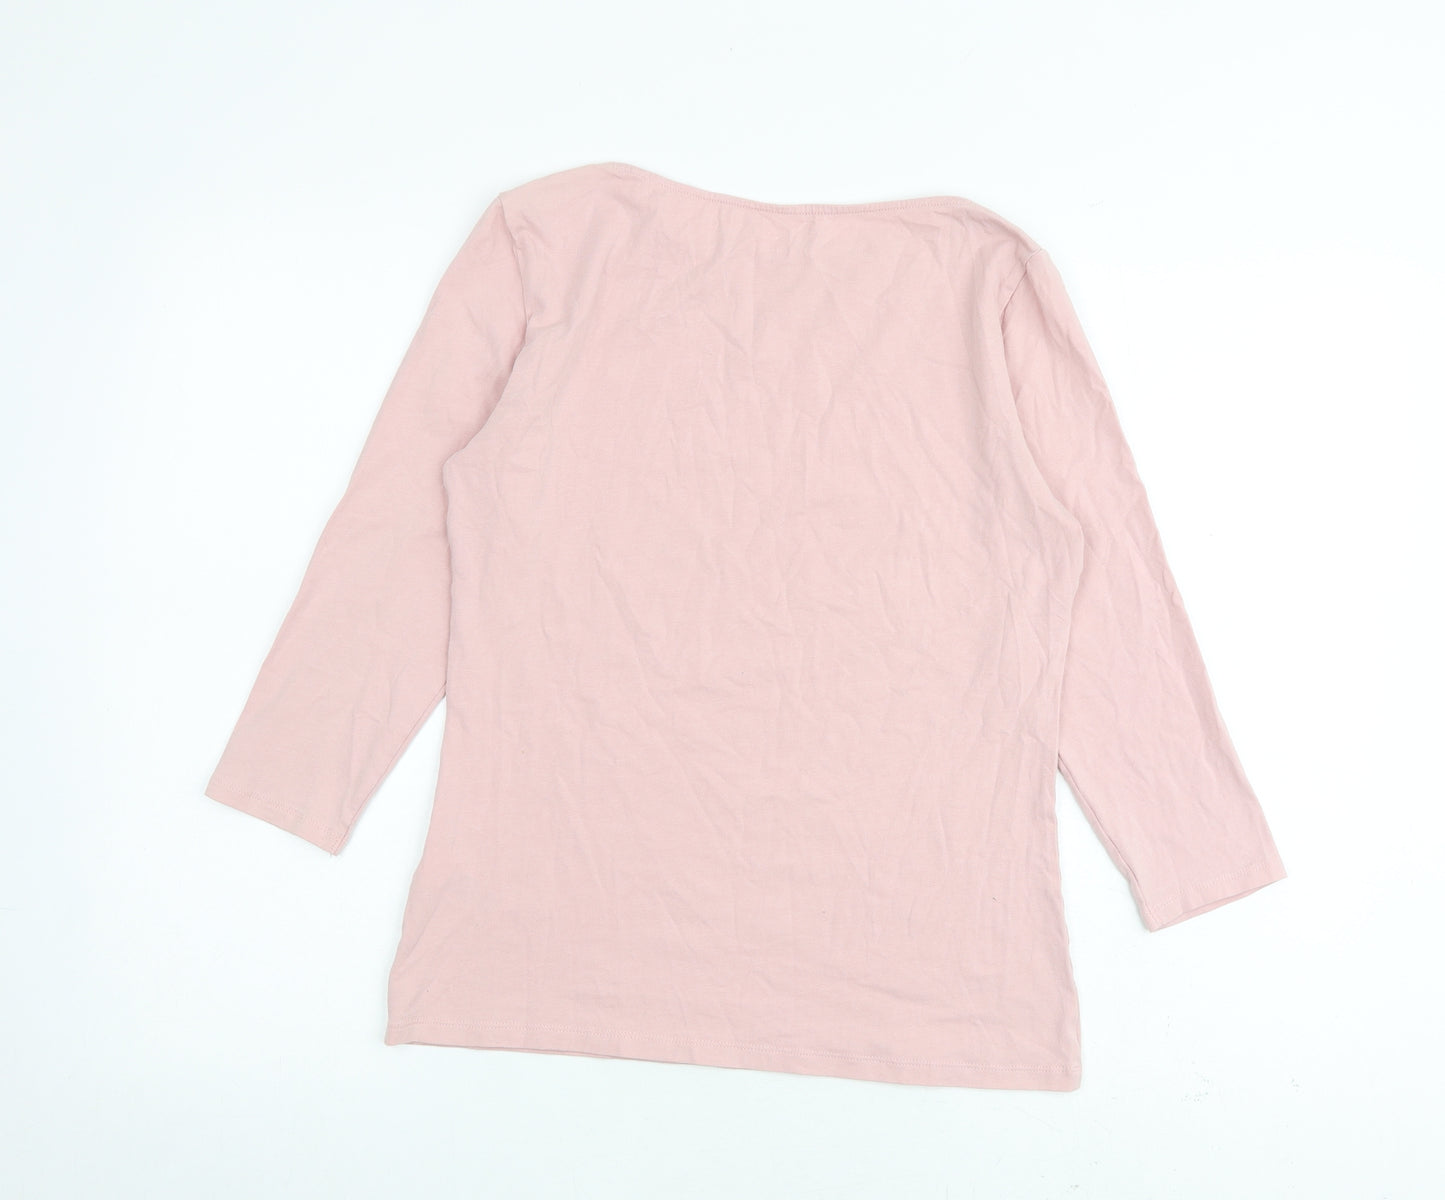 Marks and Spencer Womens Pink Cotton Basic T-Shirt Size 12 Round Neck